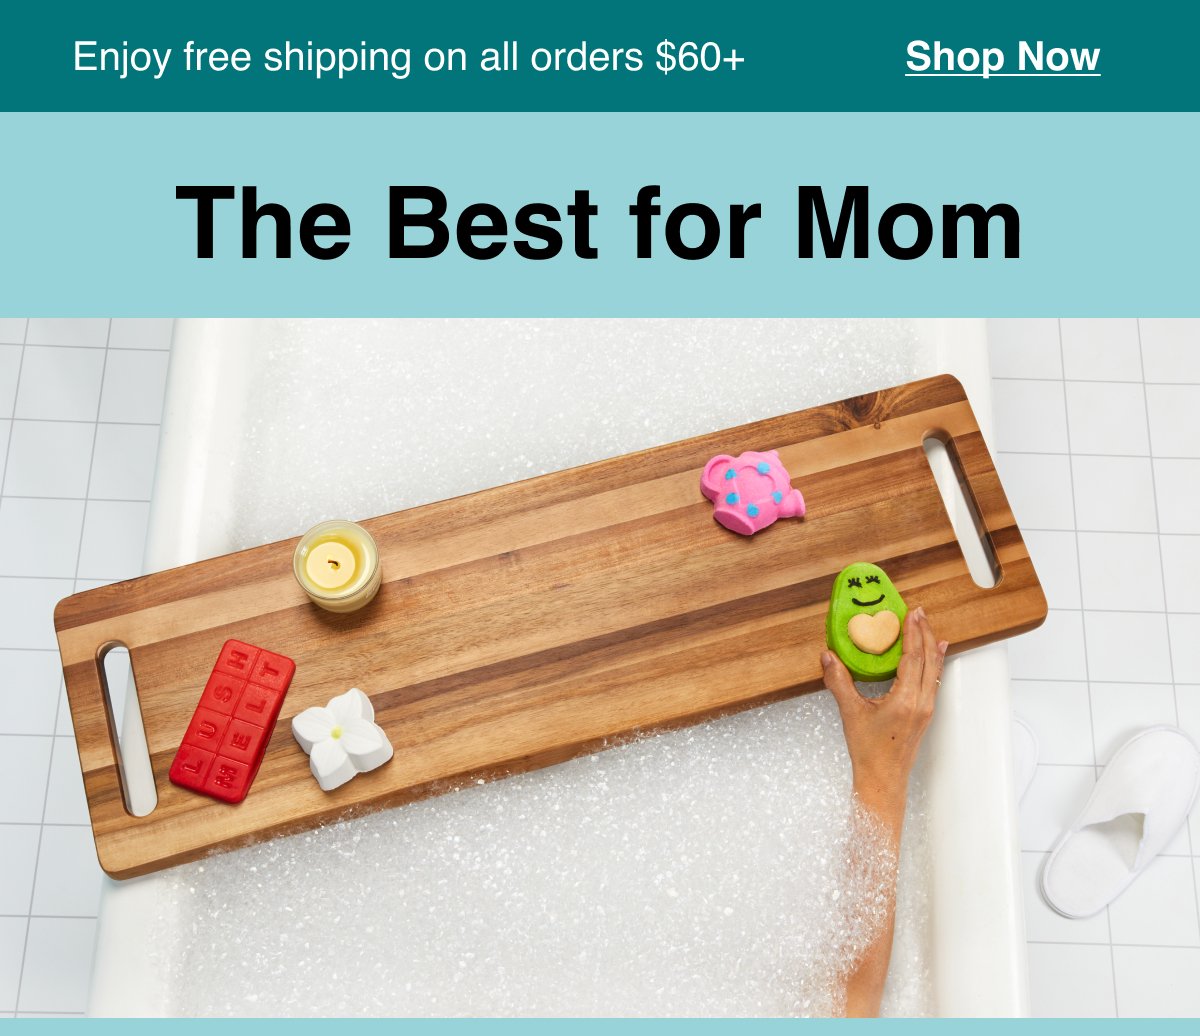 The Best for Mom: Enjoy free shipping on all orders \\$60+. Shop Now.